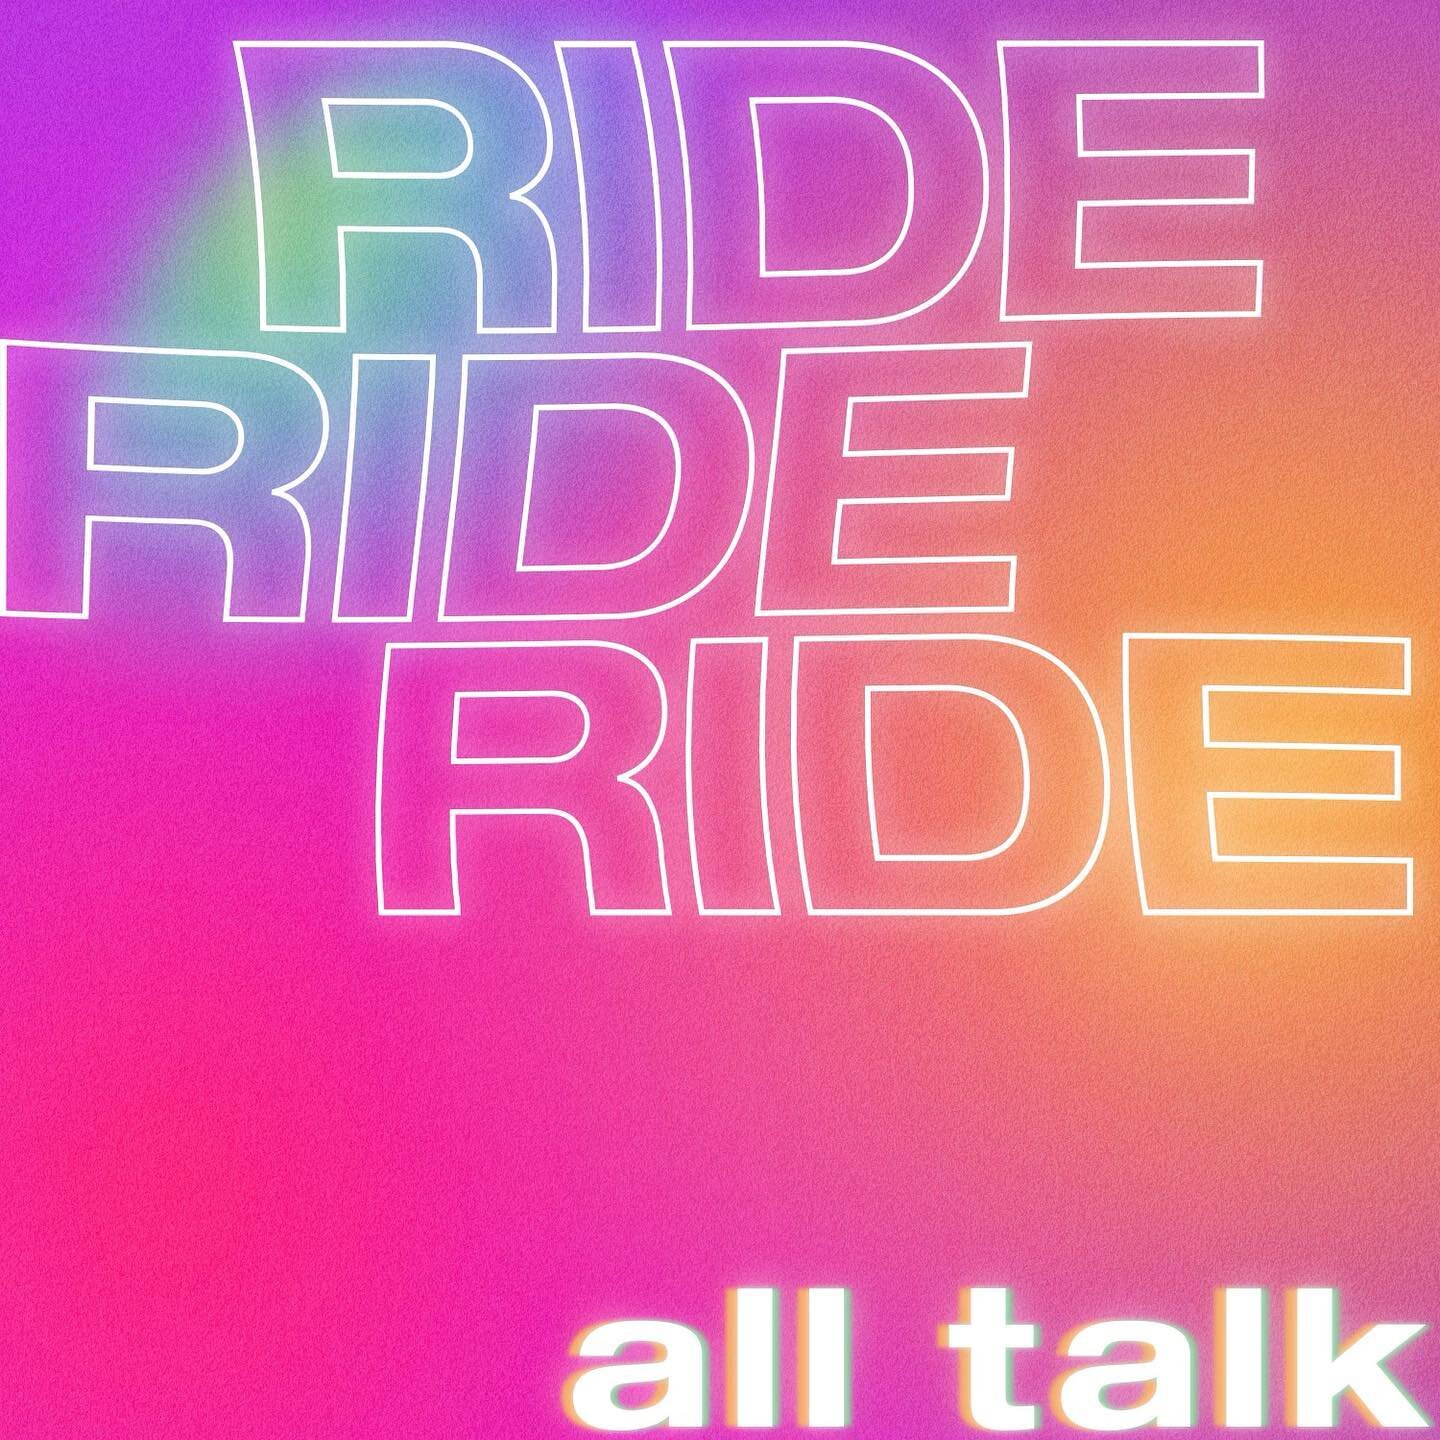 &ldquo;Ride&rdquo; by @officialalltalk is out now. Look for it in @theboldtypetv episode tonight! Co-written and vocals by @paigeblue with @malibubabie and production by@beatsbybreakfast #🙏🏼🙏🏼🙏🏼